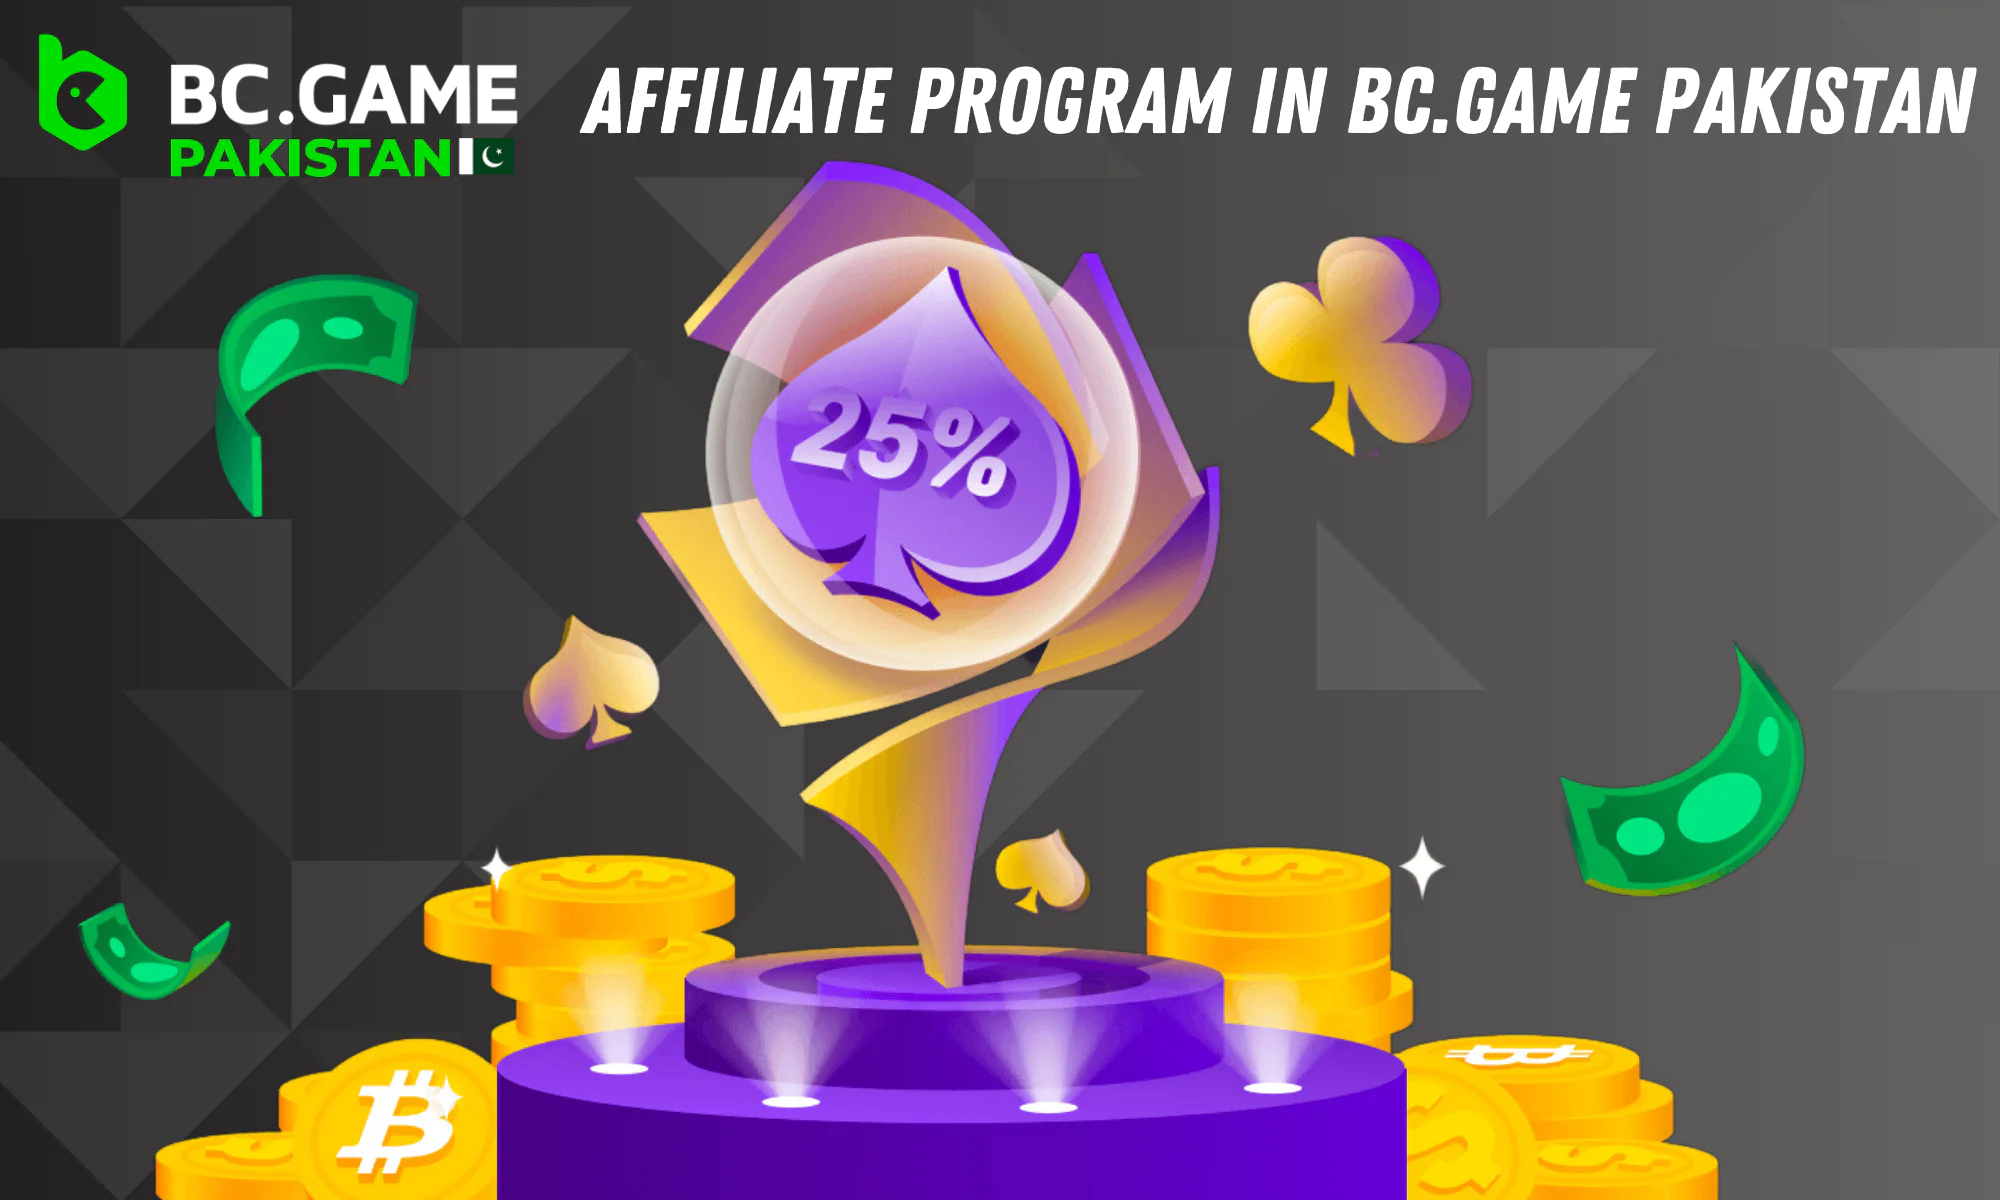 With BC.GAME Pakistan, the affiliate experience will be transparent and reliable, as this online casino is legal and trustworthy